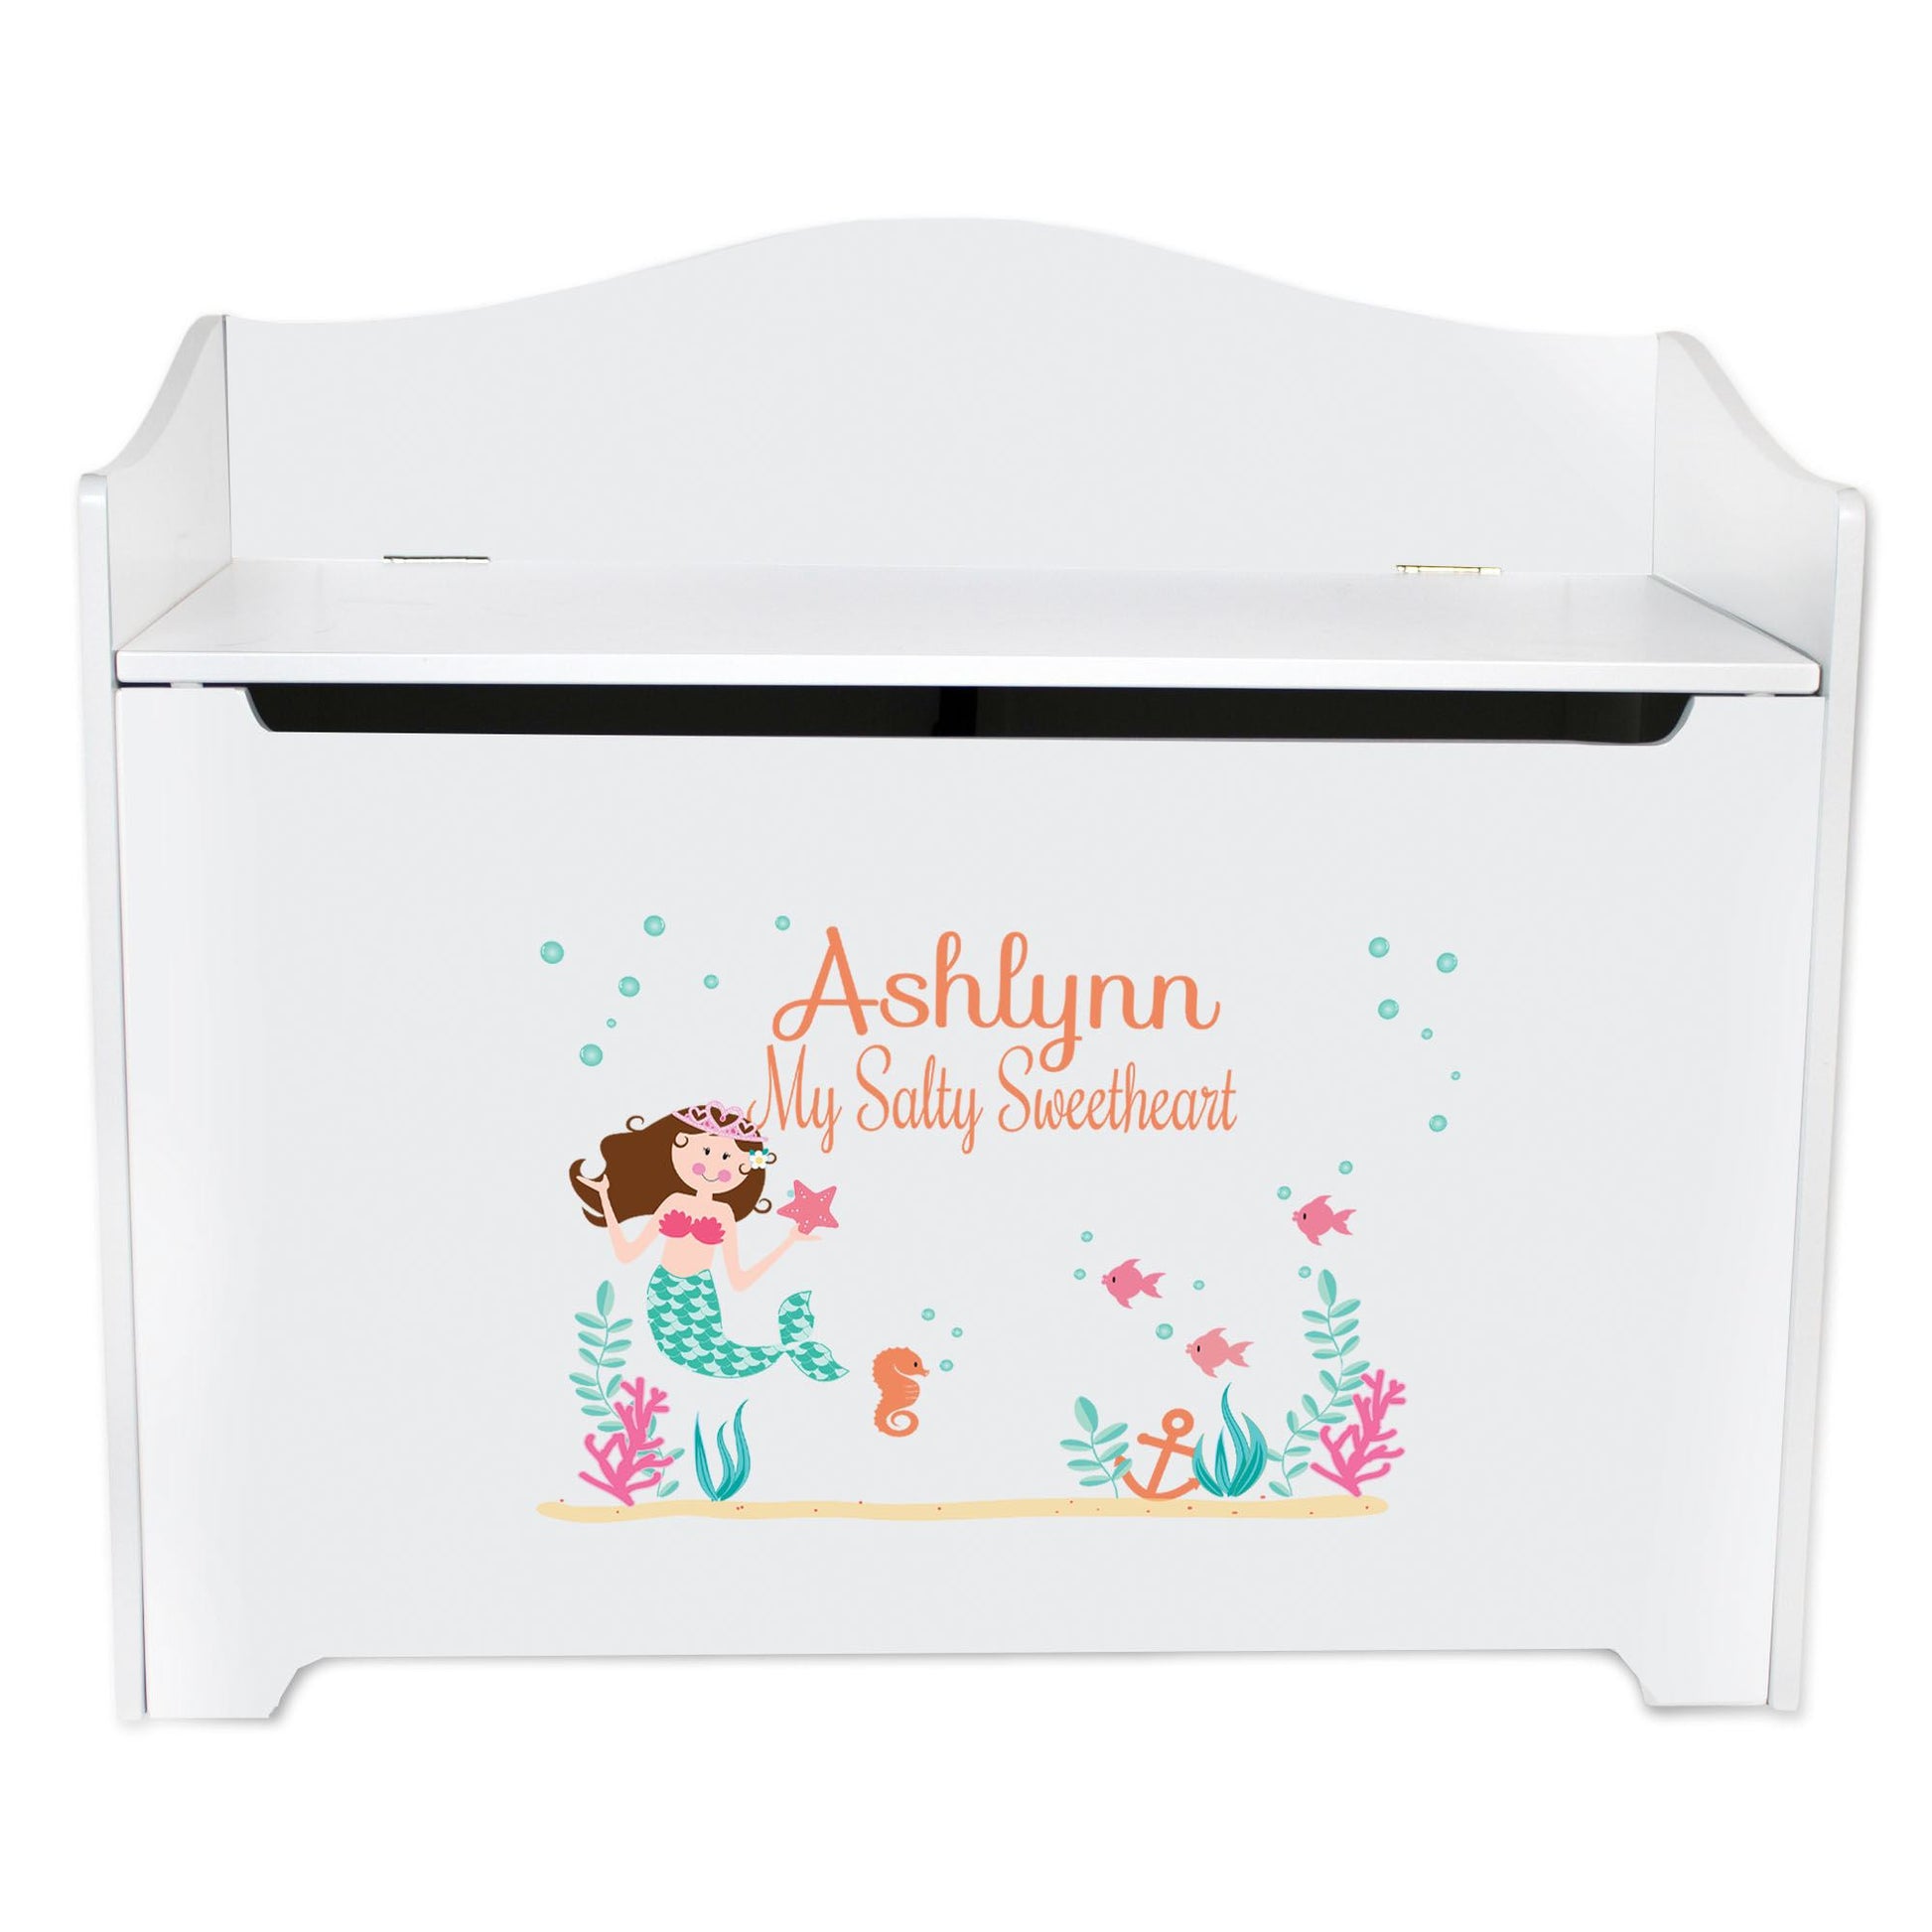 White Wooden Toy Box Bench with Brunette Mermaid Princess design